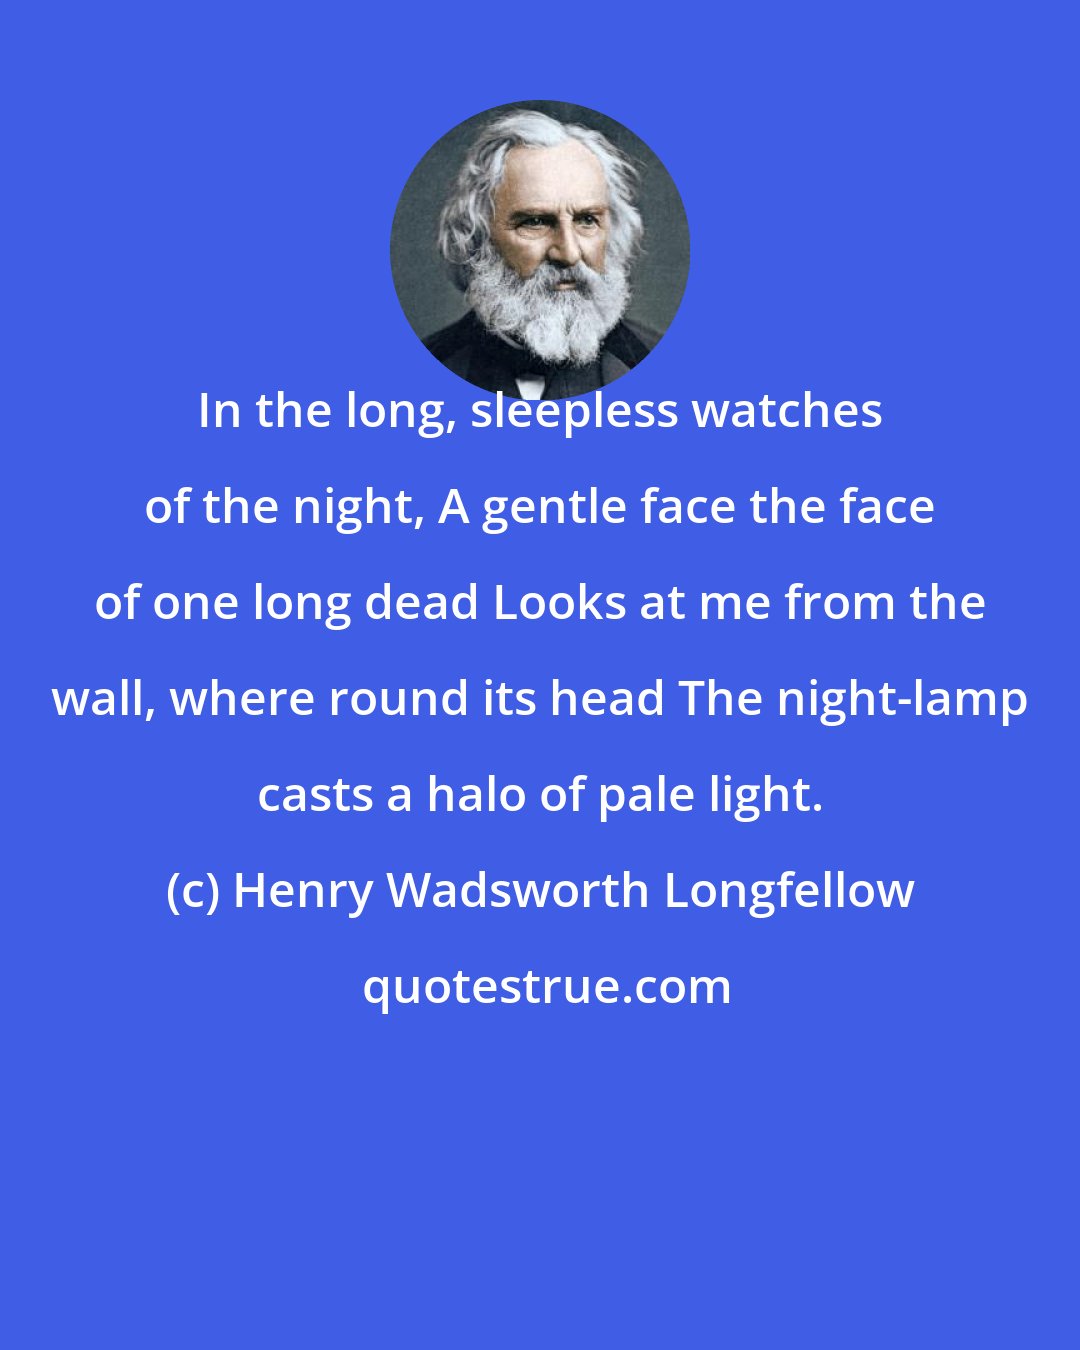 Henry Wadsworth Longfellow: In the long, sleepless watches of the night, A gentle face the face of one long dead Looks at me from the wall, where round its head The night-lamp casts a halo of pale light.